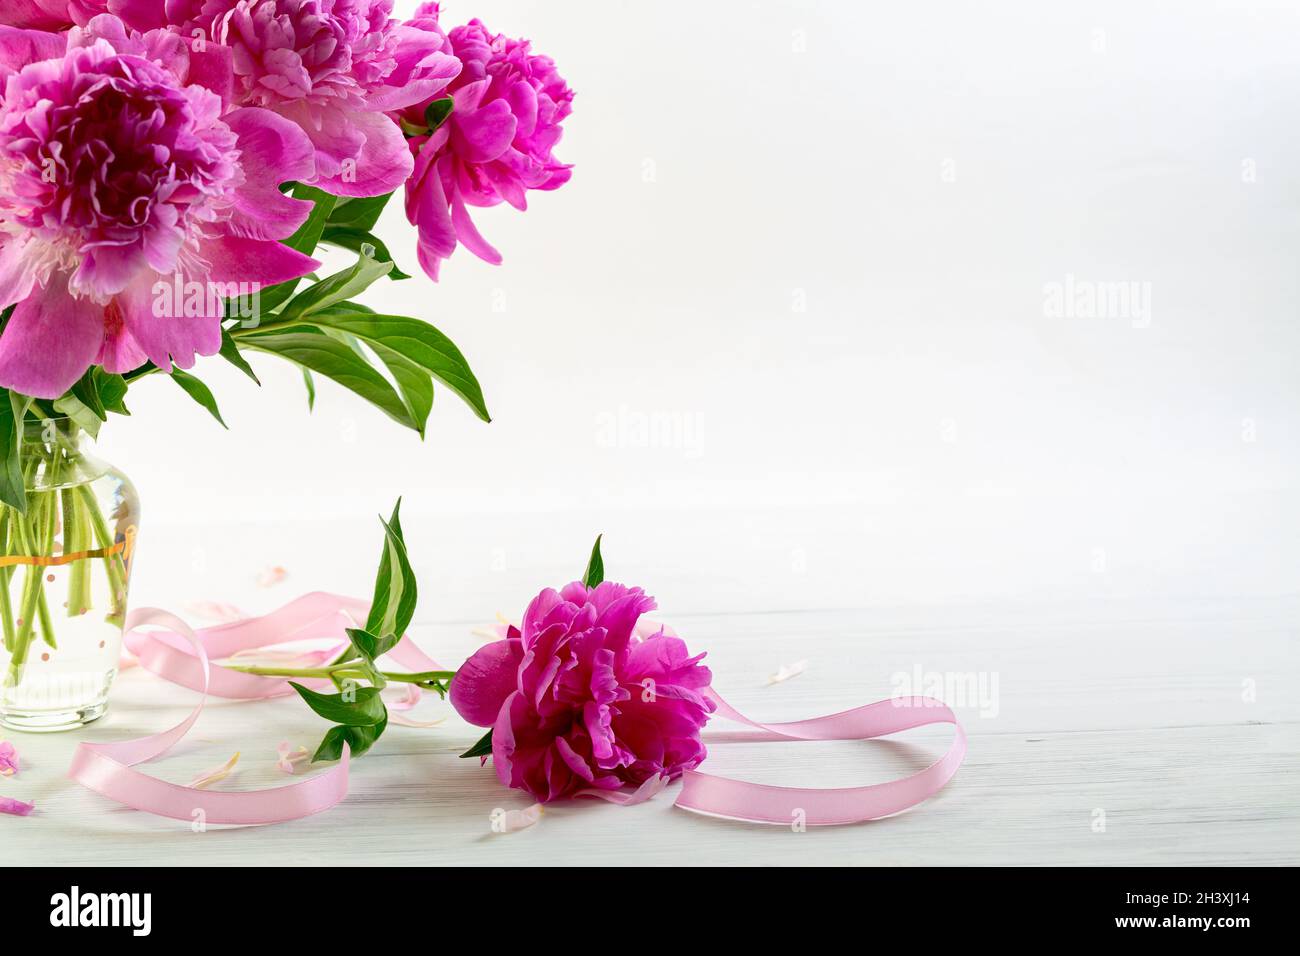 Gorgeous pink peonies with a satin ribbon. Stock Photo